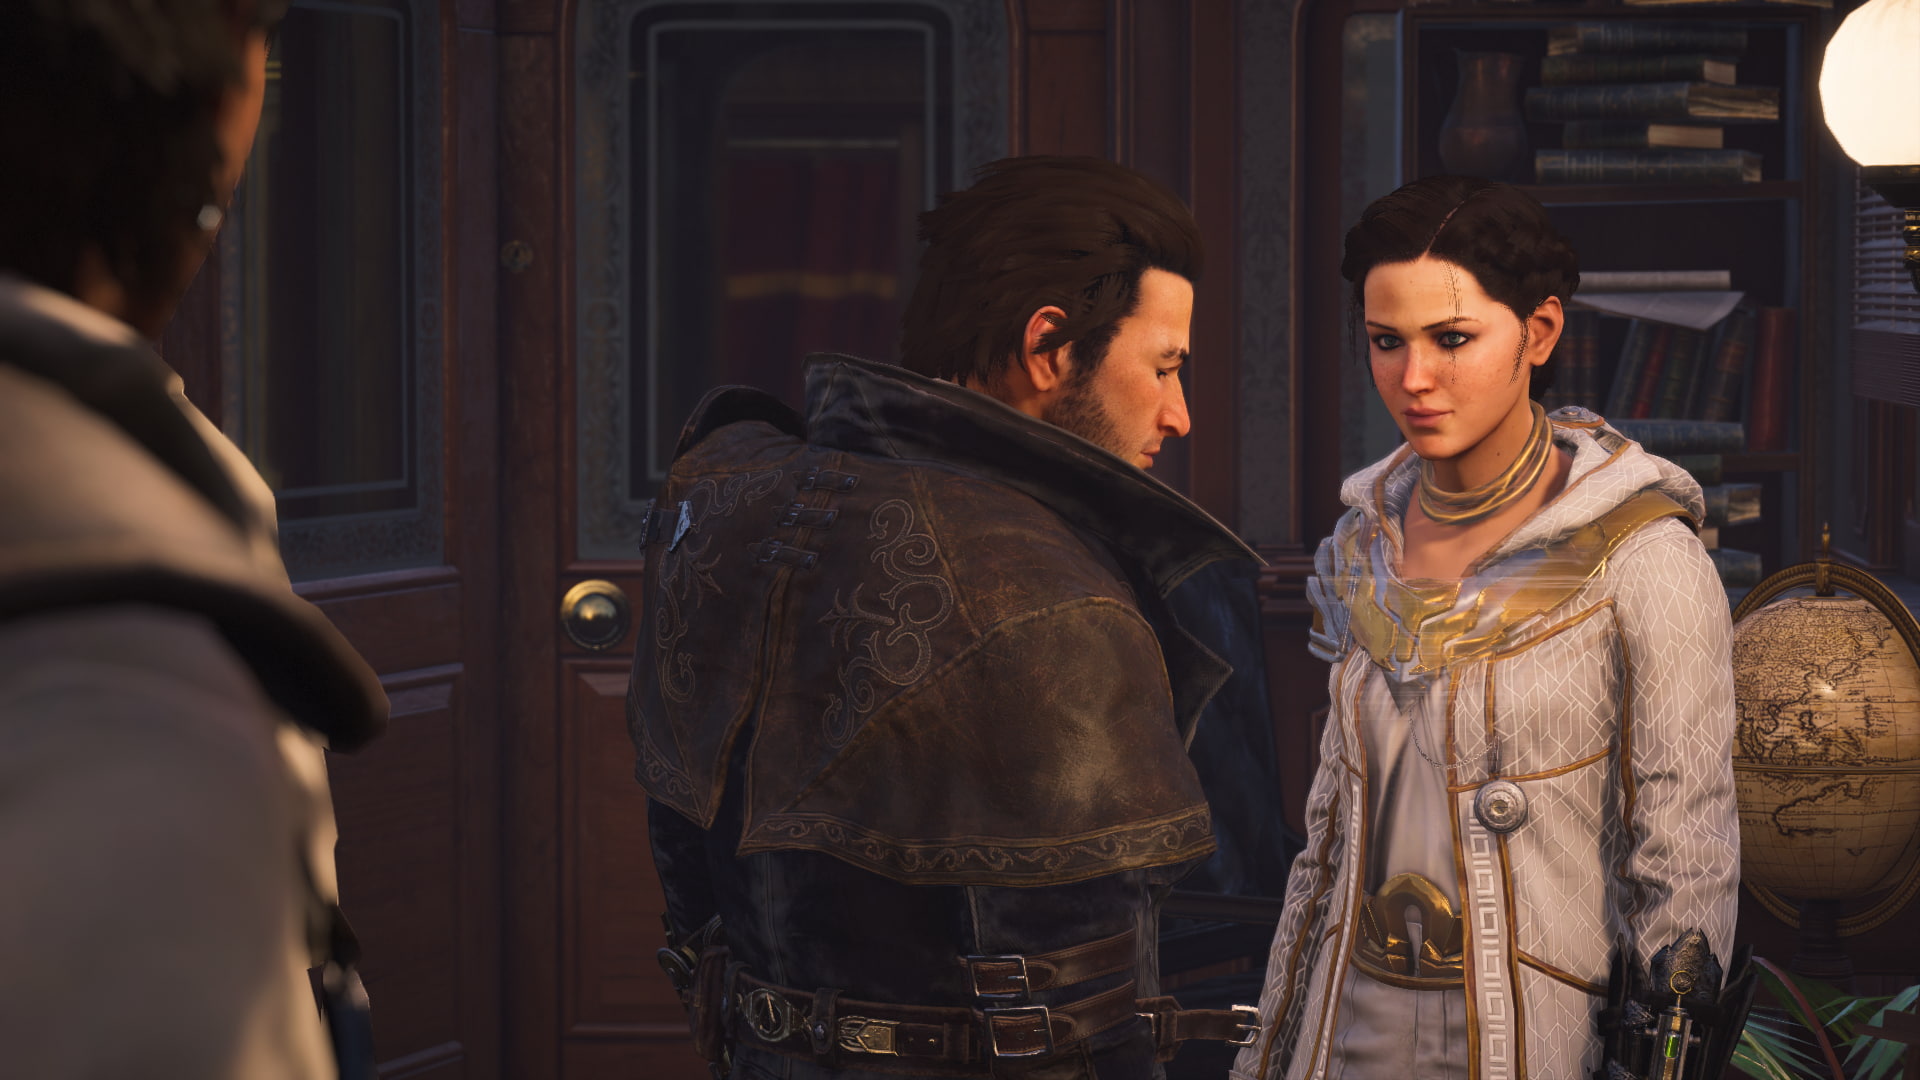 Jacob Frye, Evie Frye, Assassin's Creed, clothing, togetherness